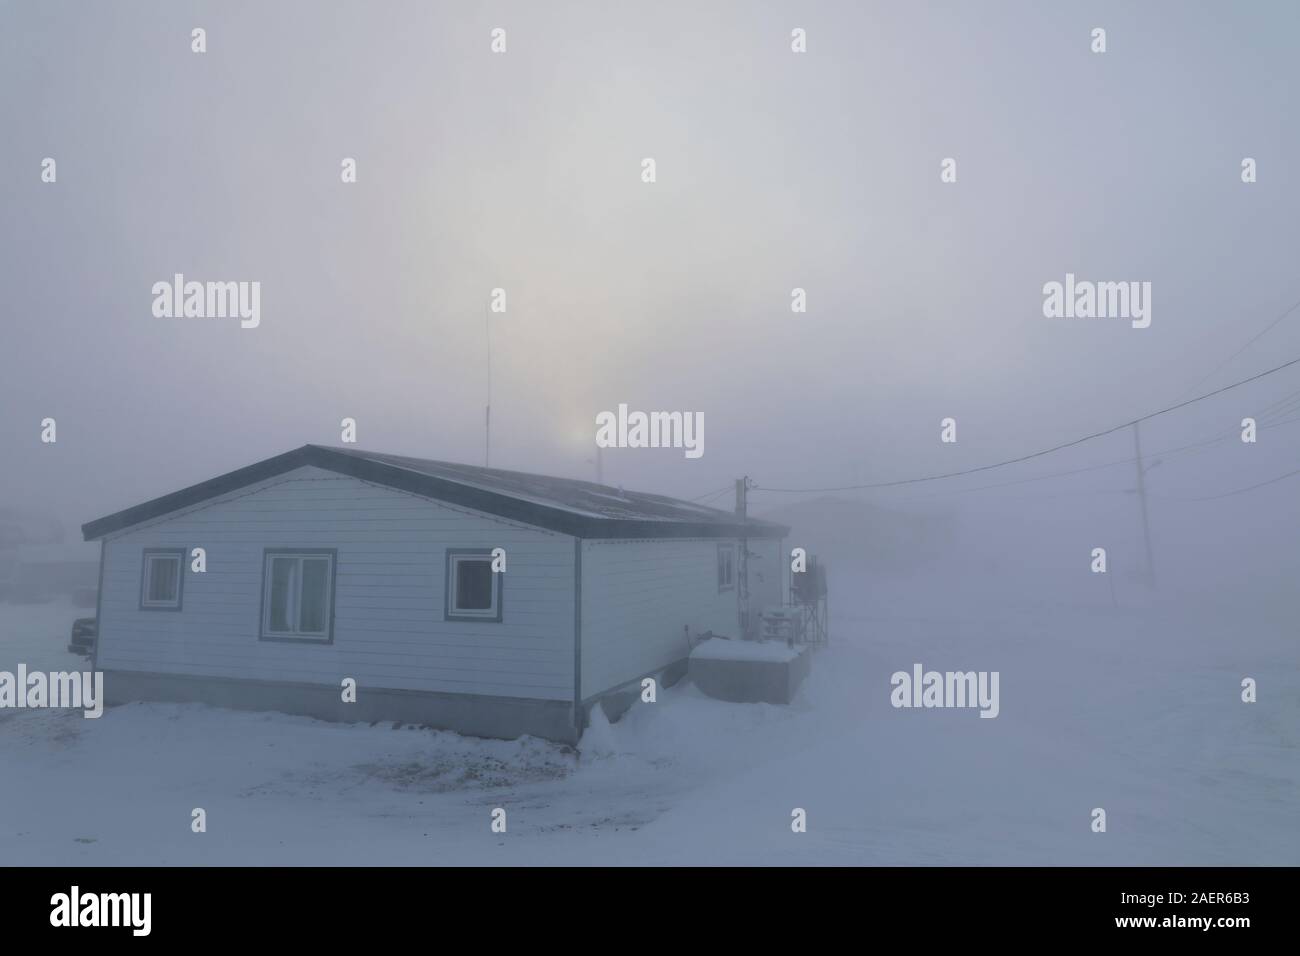 Blizzard conditions in Arviat, Nunavut Canada during December month.  House almost completely gone under winter conditions in the Canadian Arctic Stock Photo